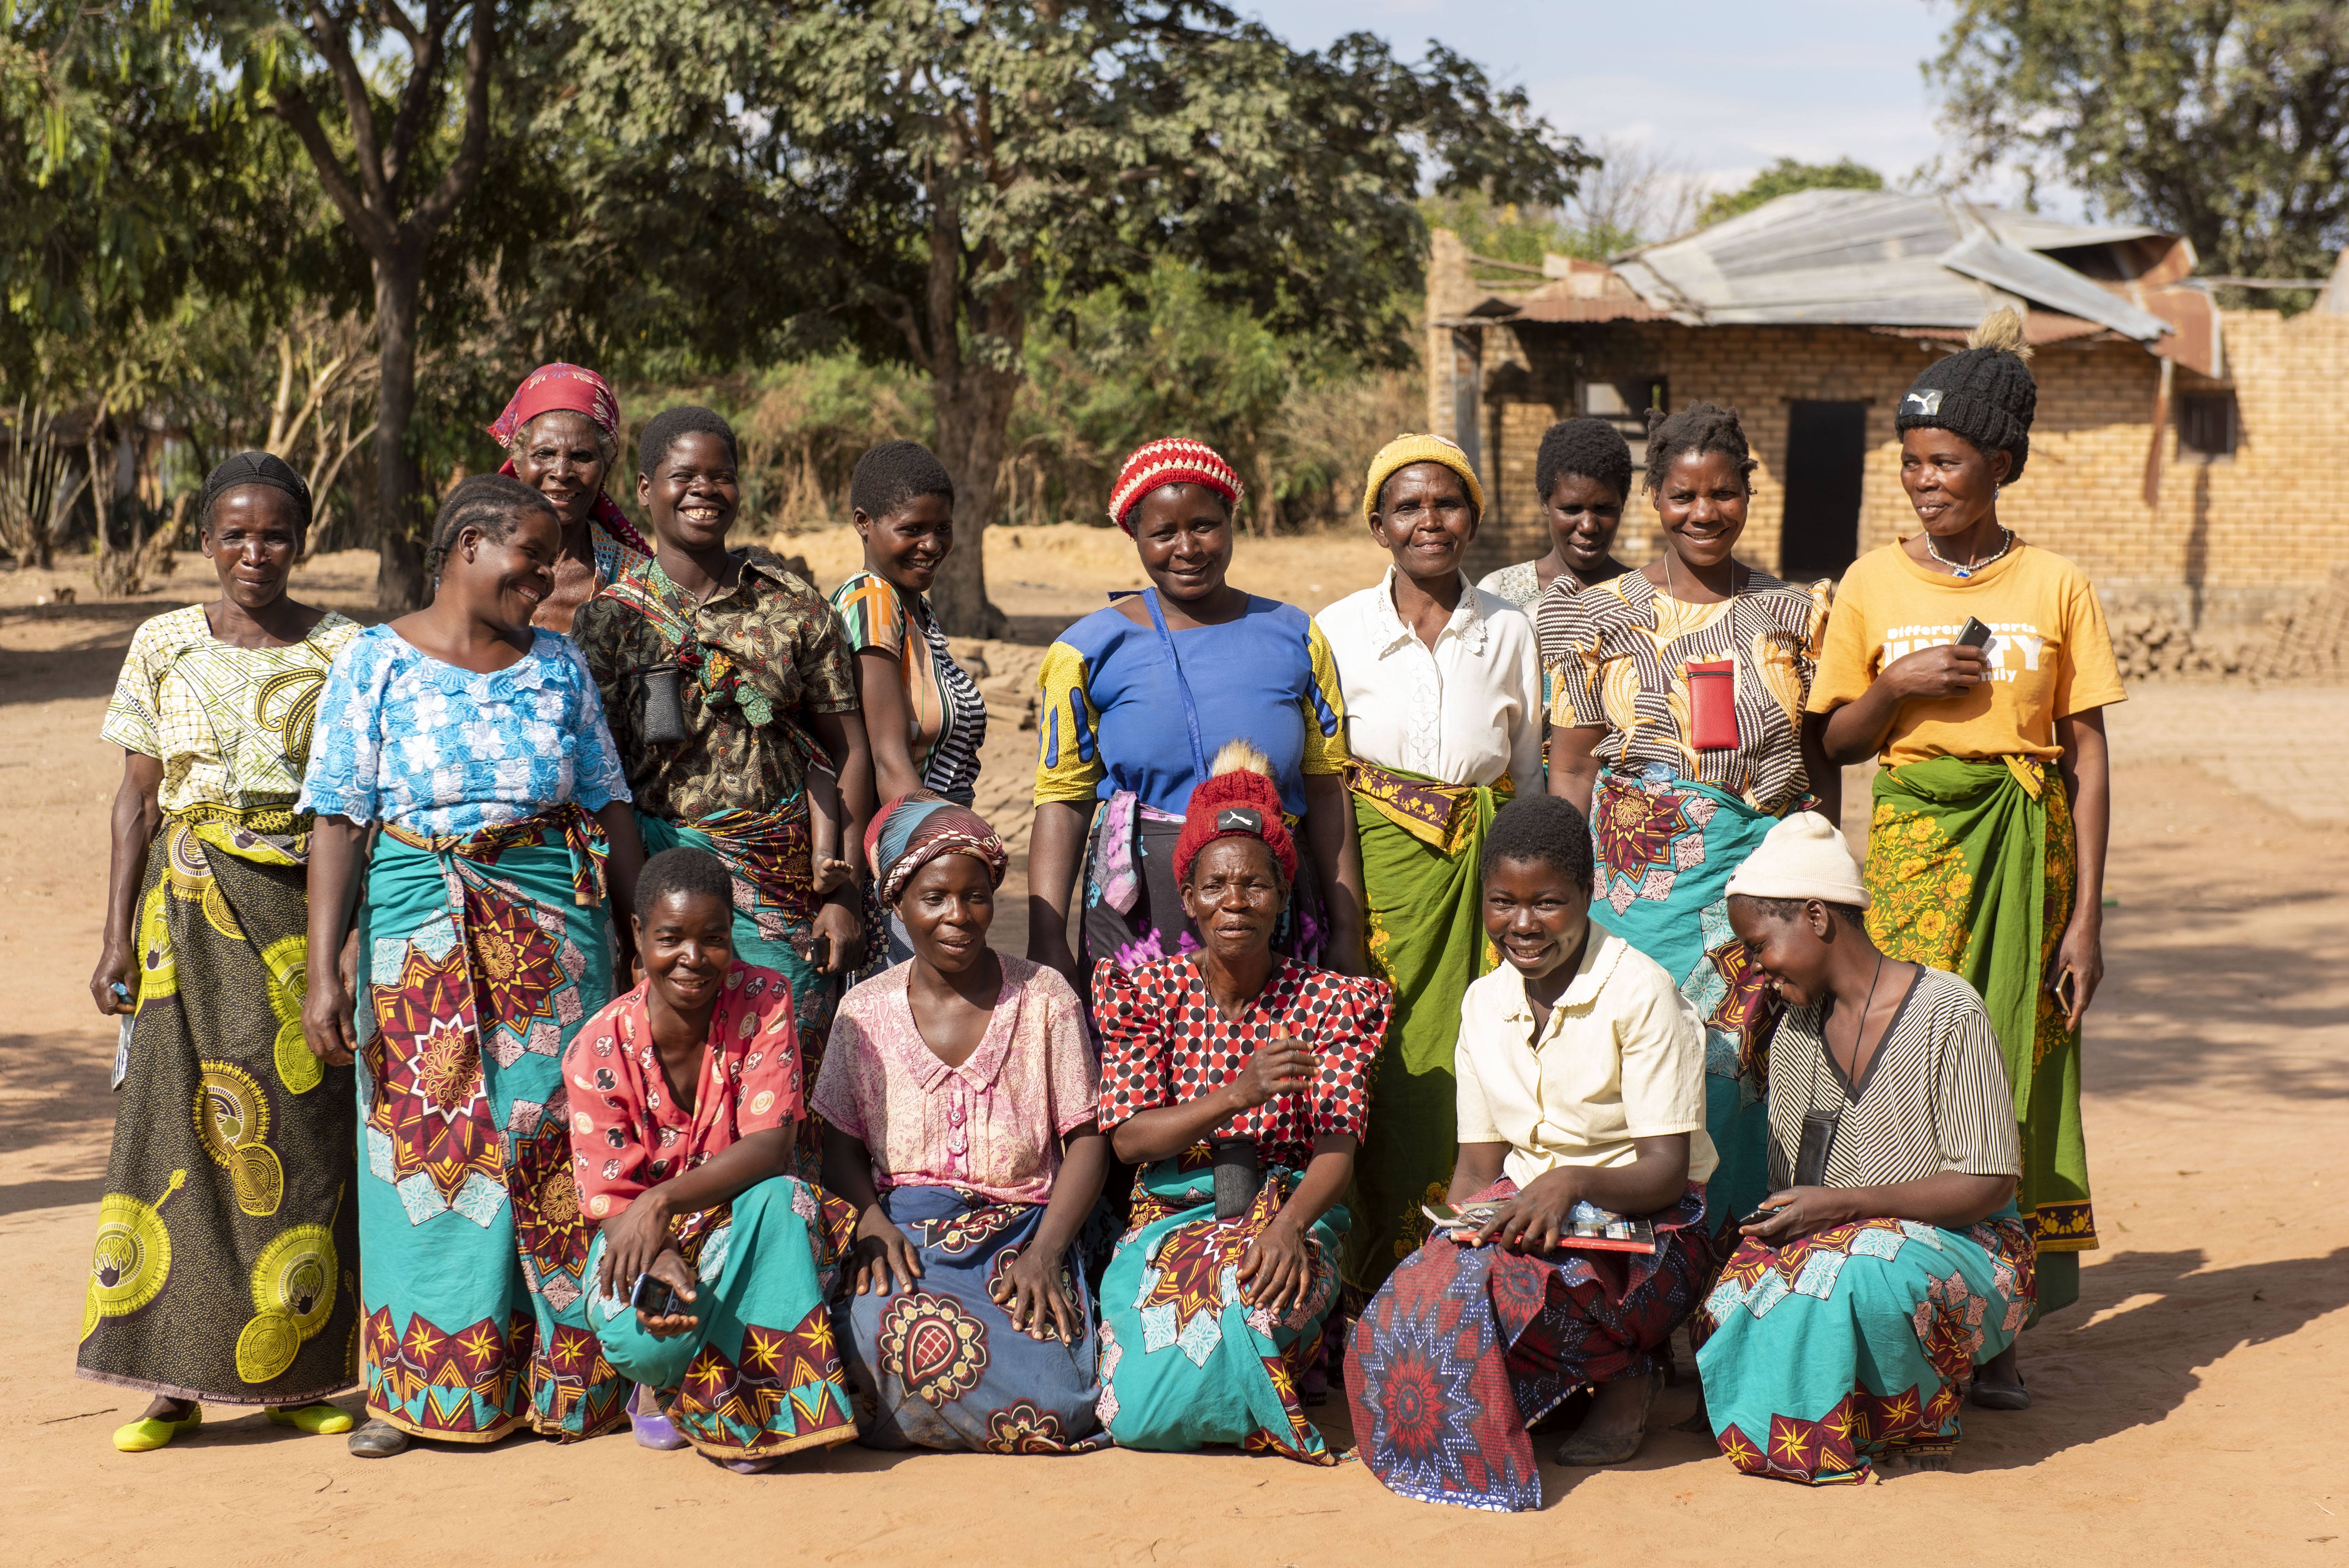 A group of 14 Malawian women stand in 2 rows facing the camera. They're wearing colorful dresses, and most of them are smiling. 